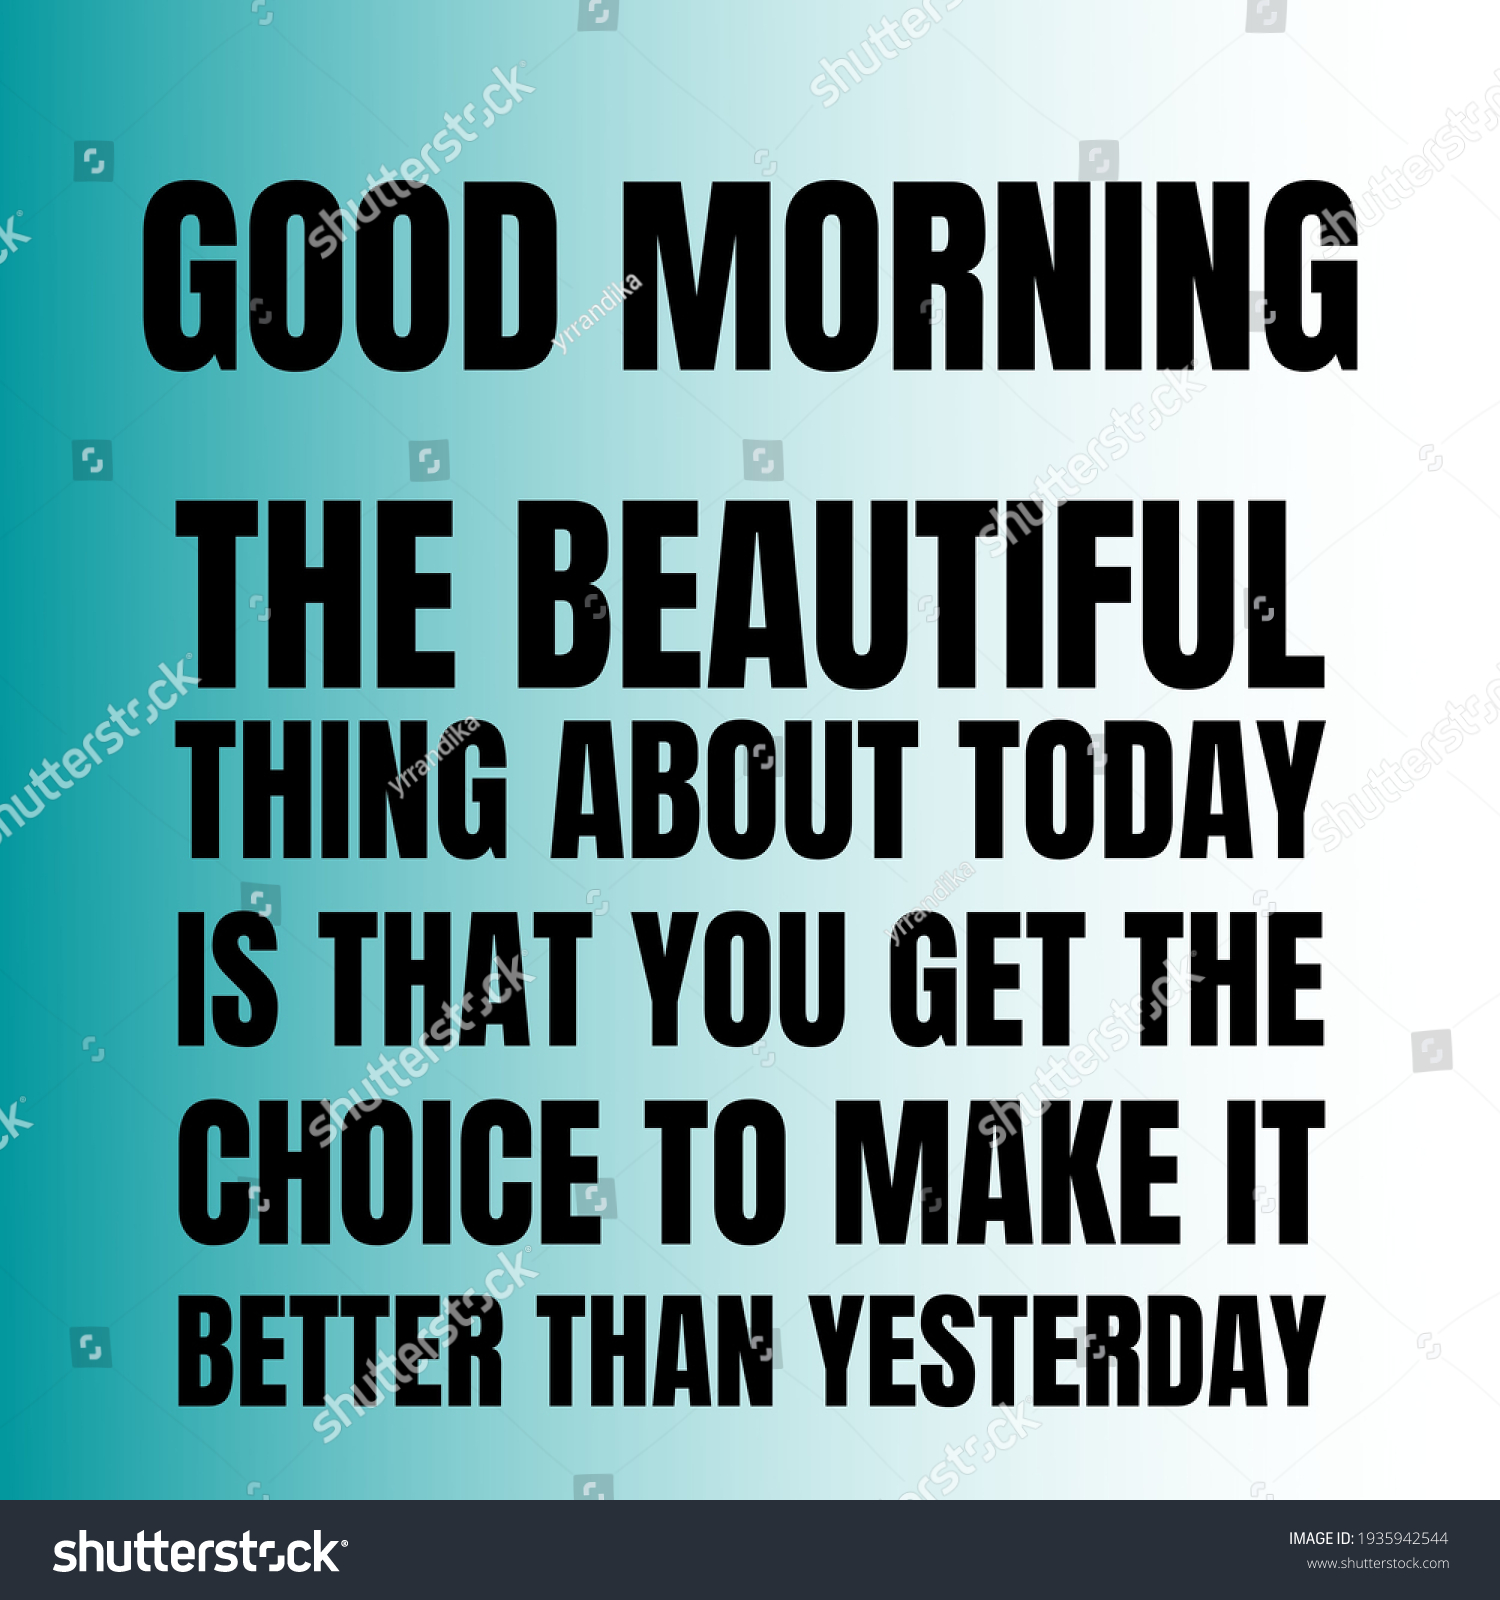 Good morning motivational quotes